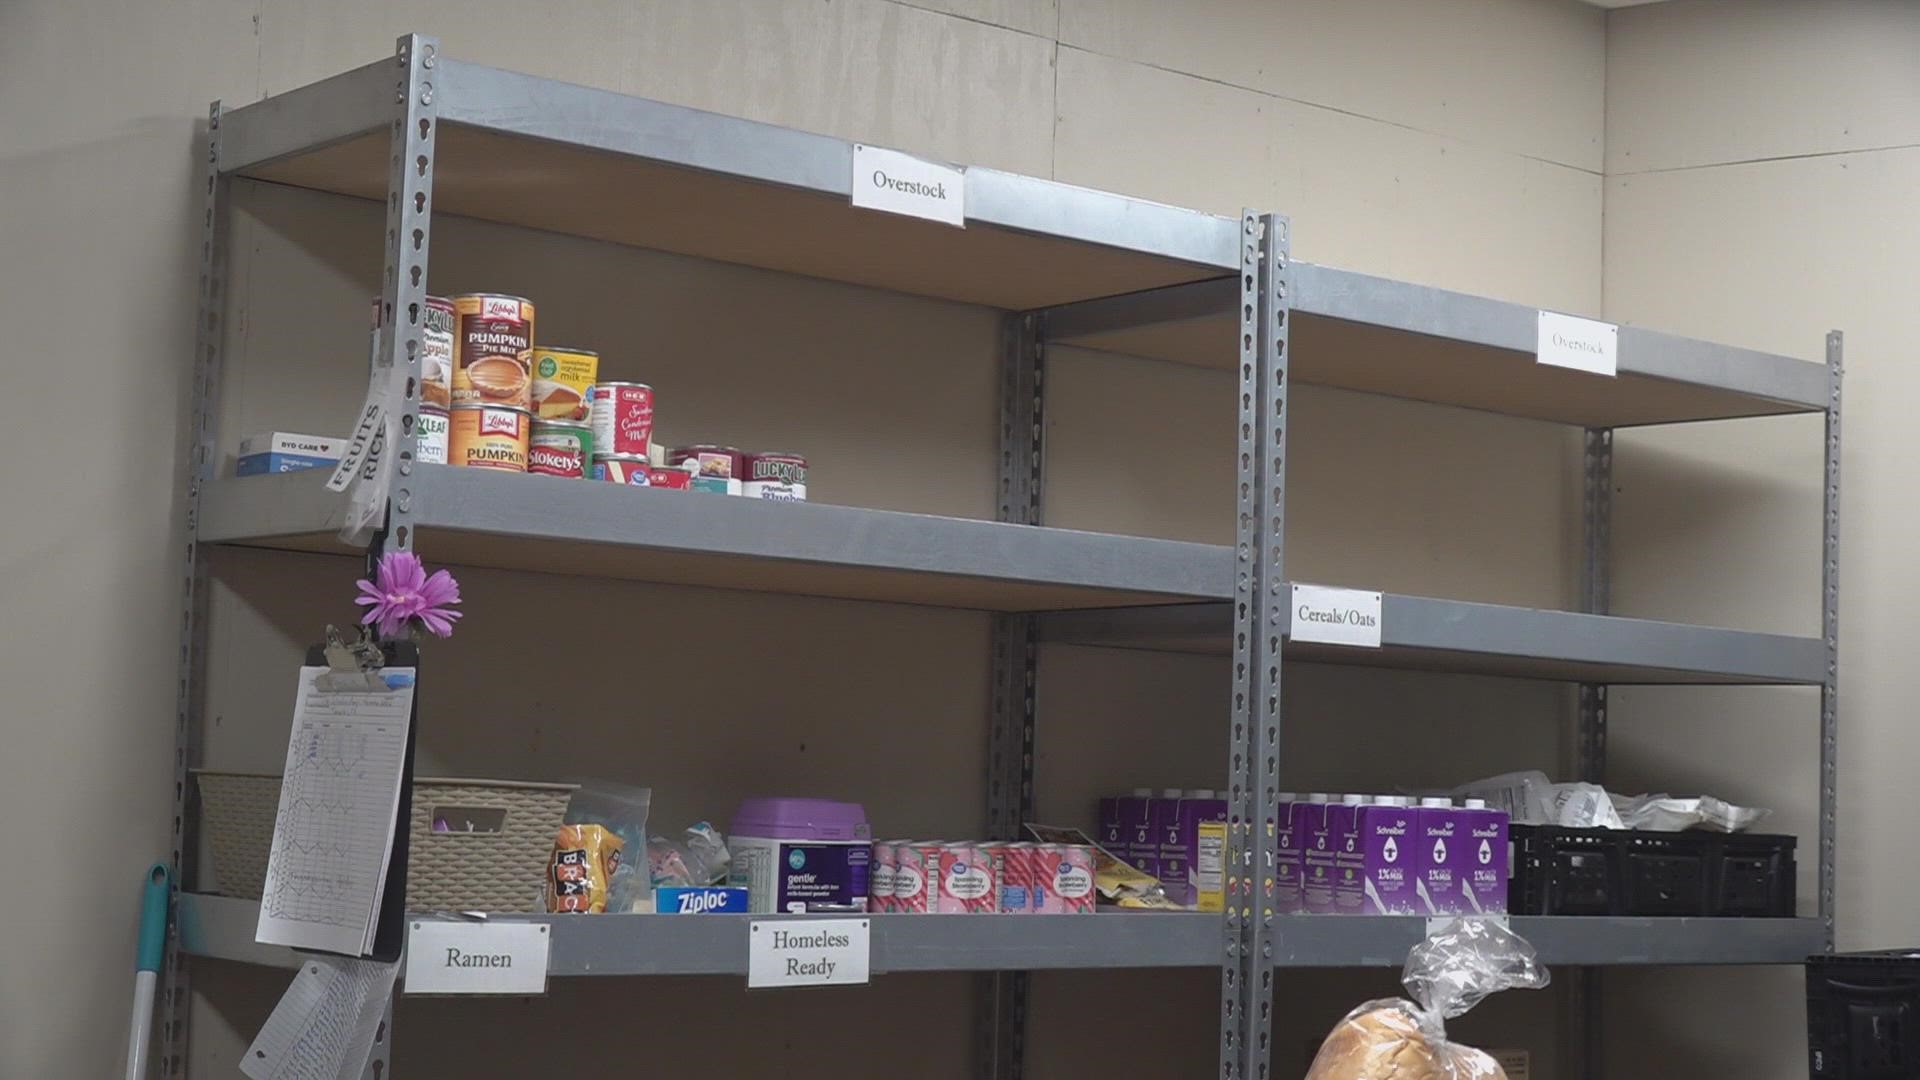 Food donations are down at the Salvation Army among rising costs.